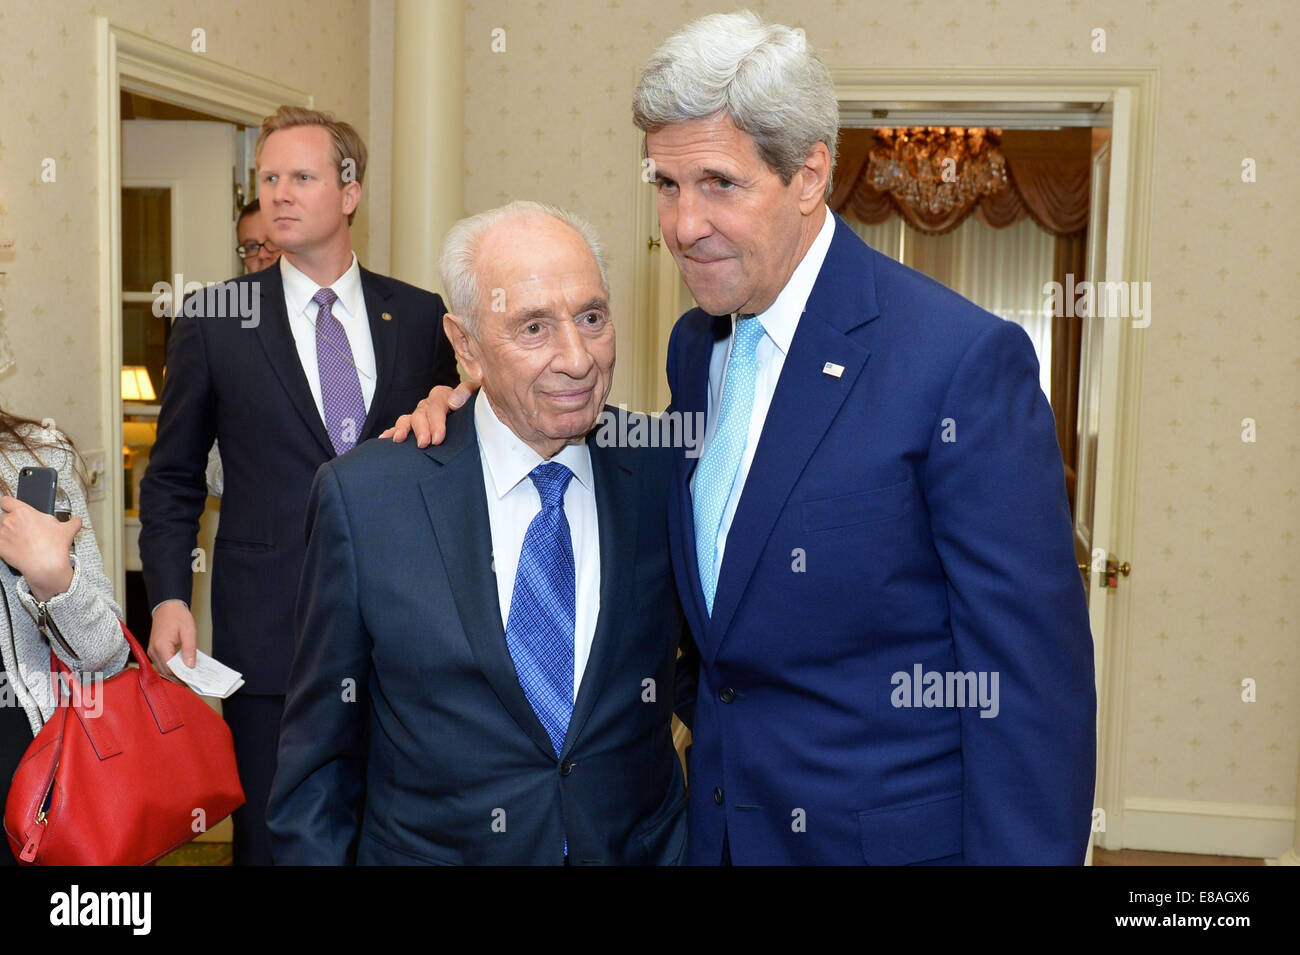 U.S. Secretary of State John Kerry meets with former Israeli President Shimon Peres in New York City on September 22, 2014. The Stock Photo